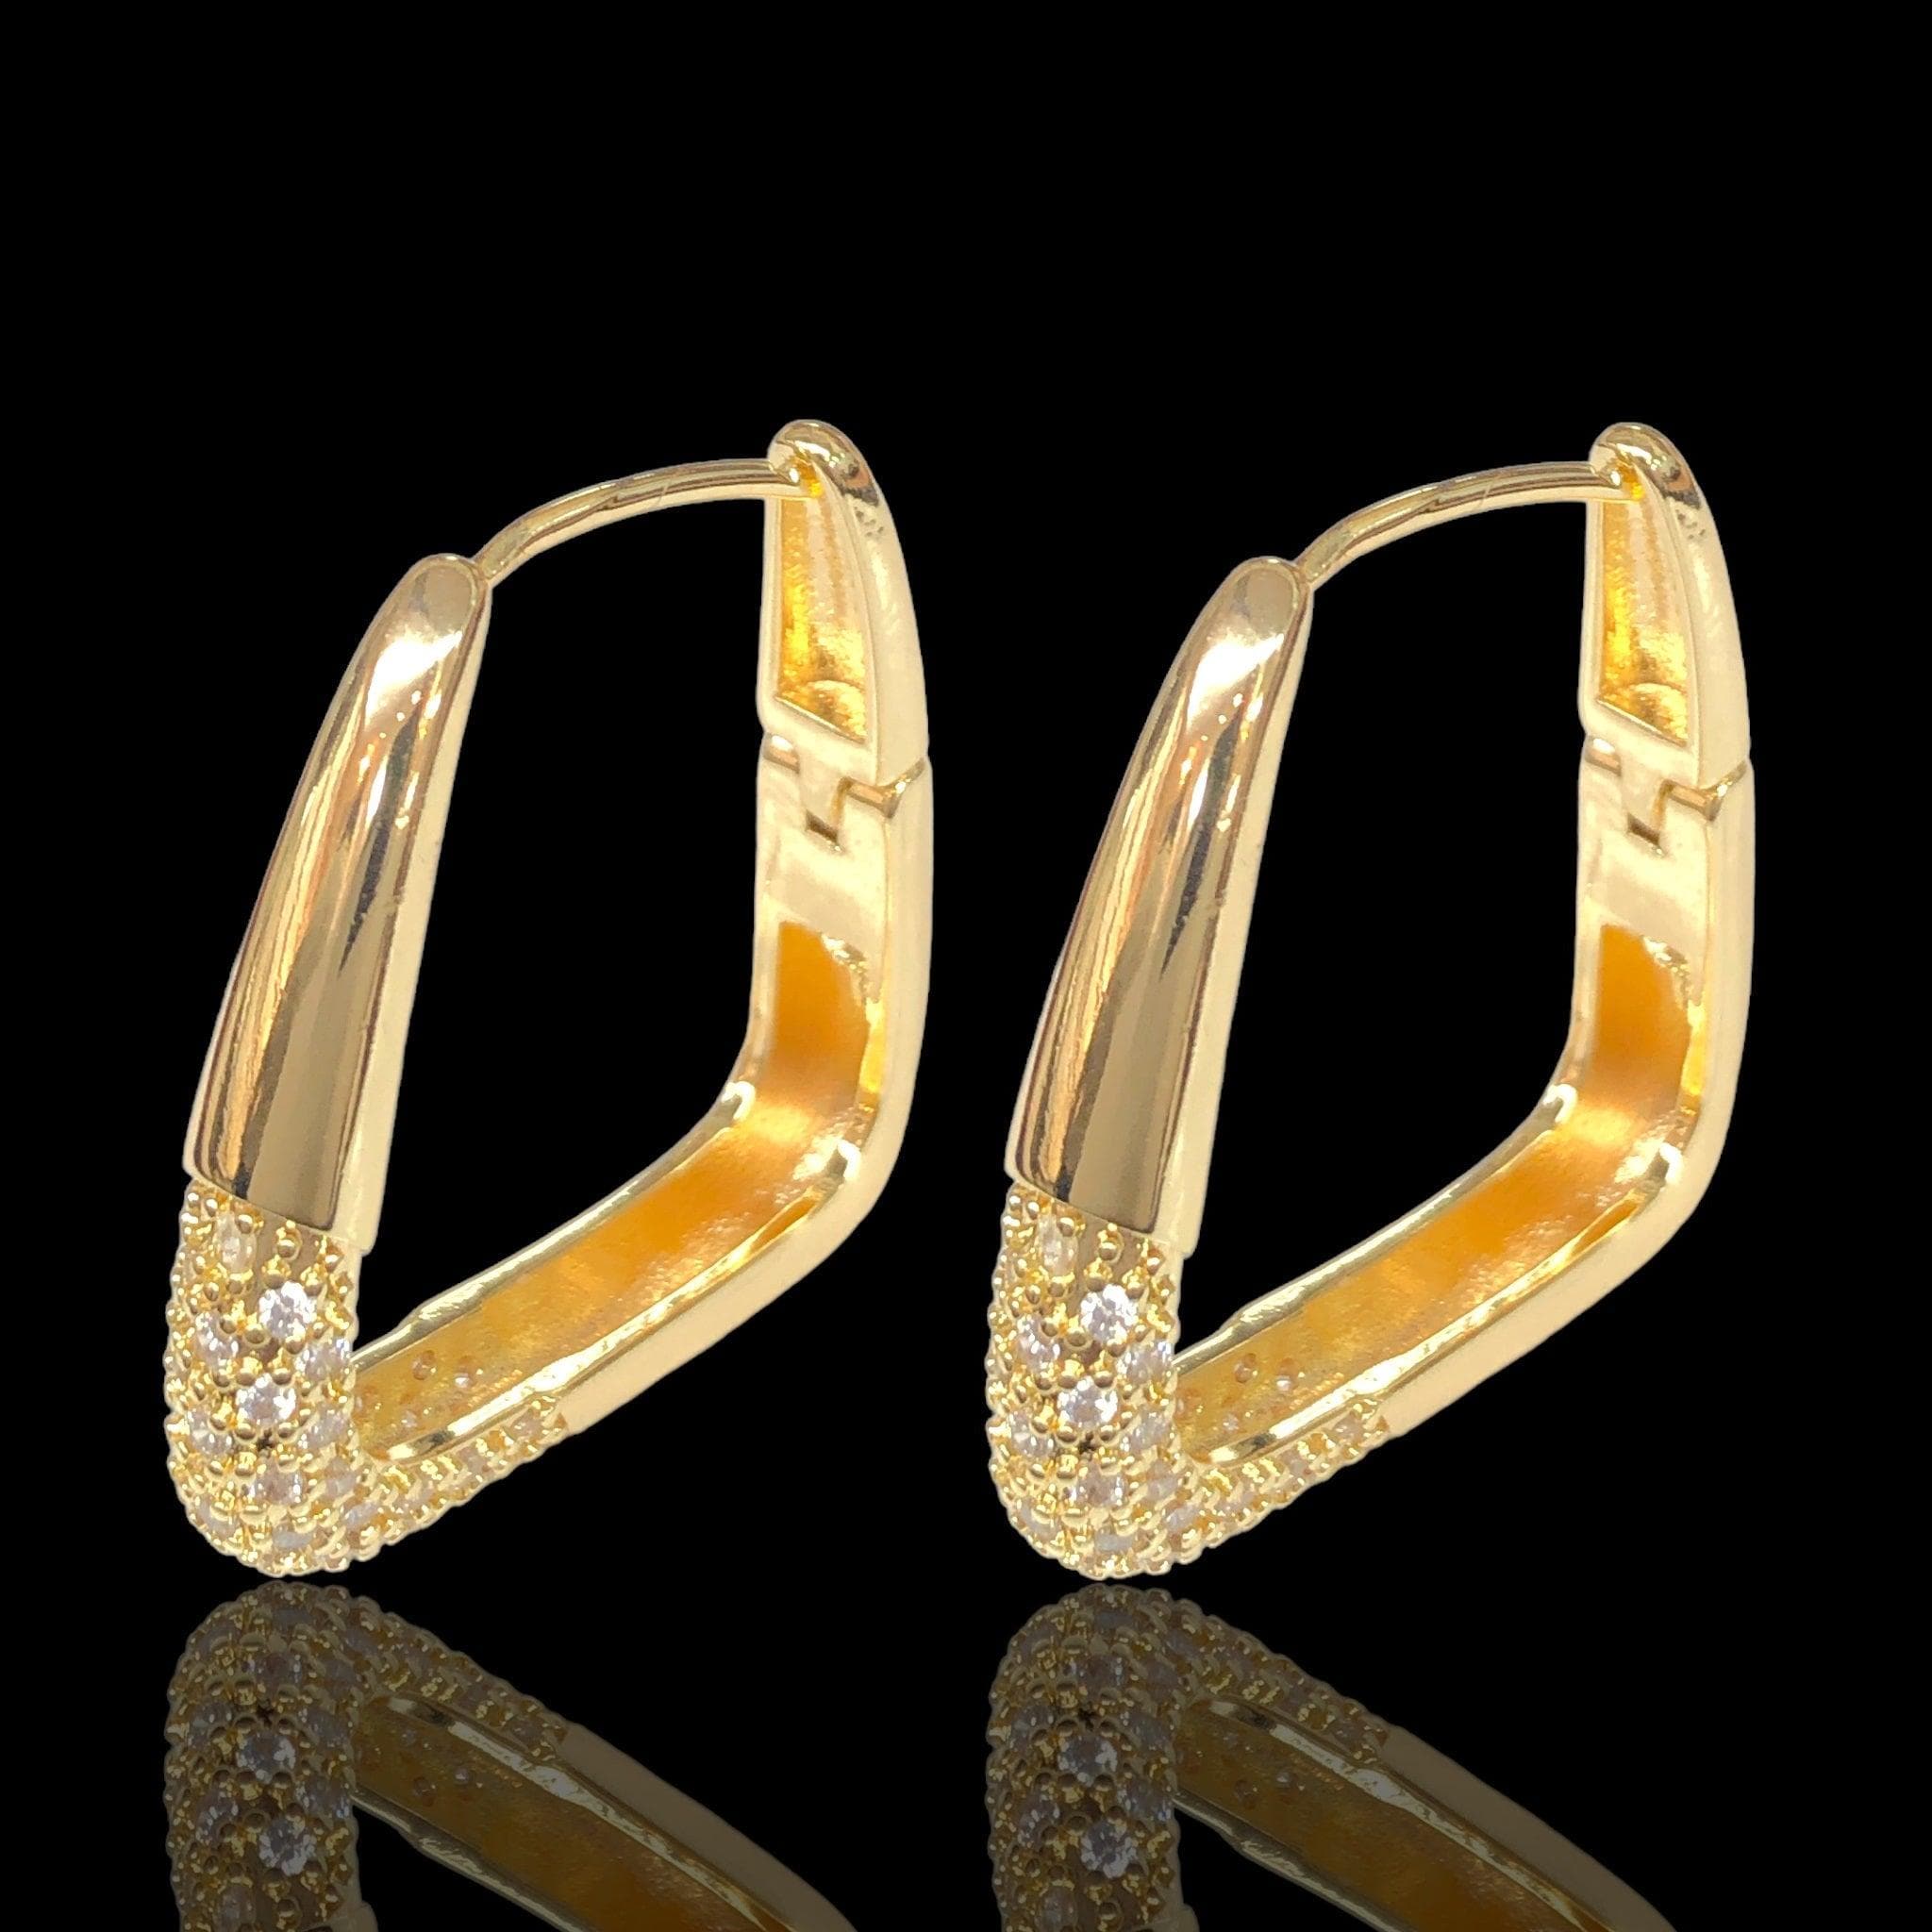 OLE 0610 18K Gold Filled French Square CZ Hoop Earrings Oro Laminado Kuania